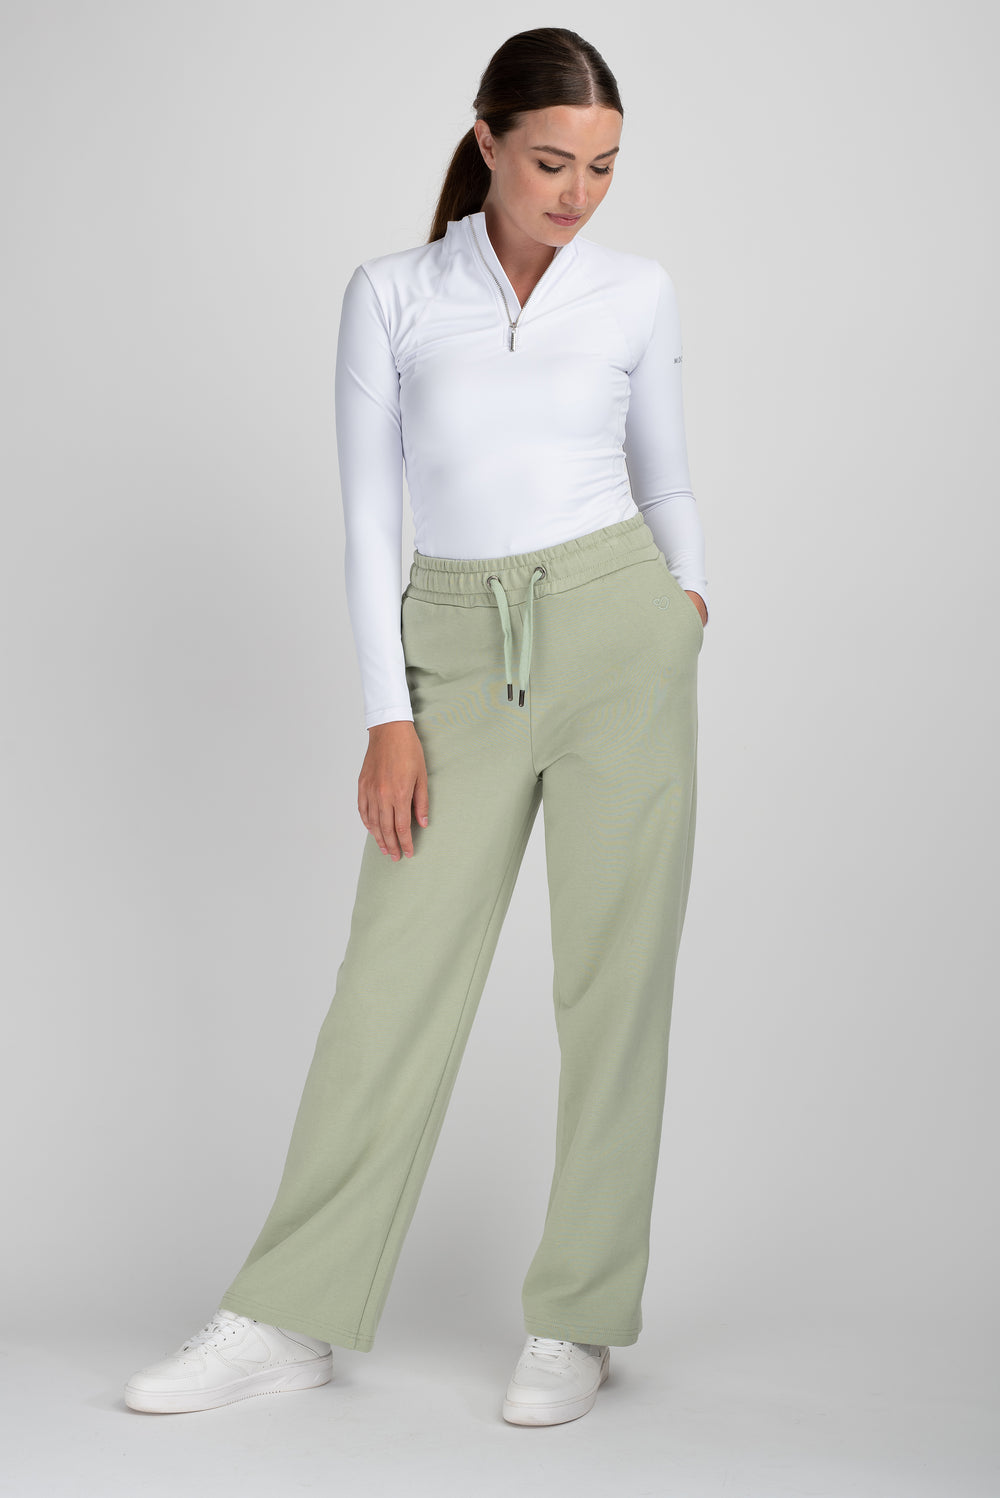 Woman in white top and green horse riding tights standing.